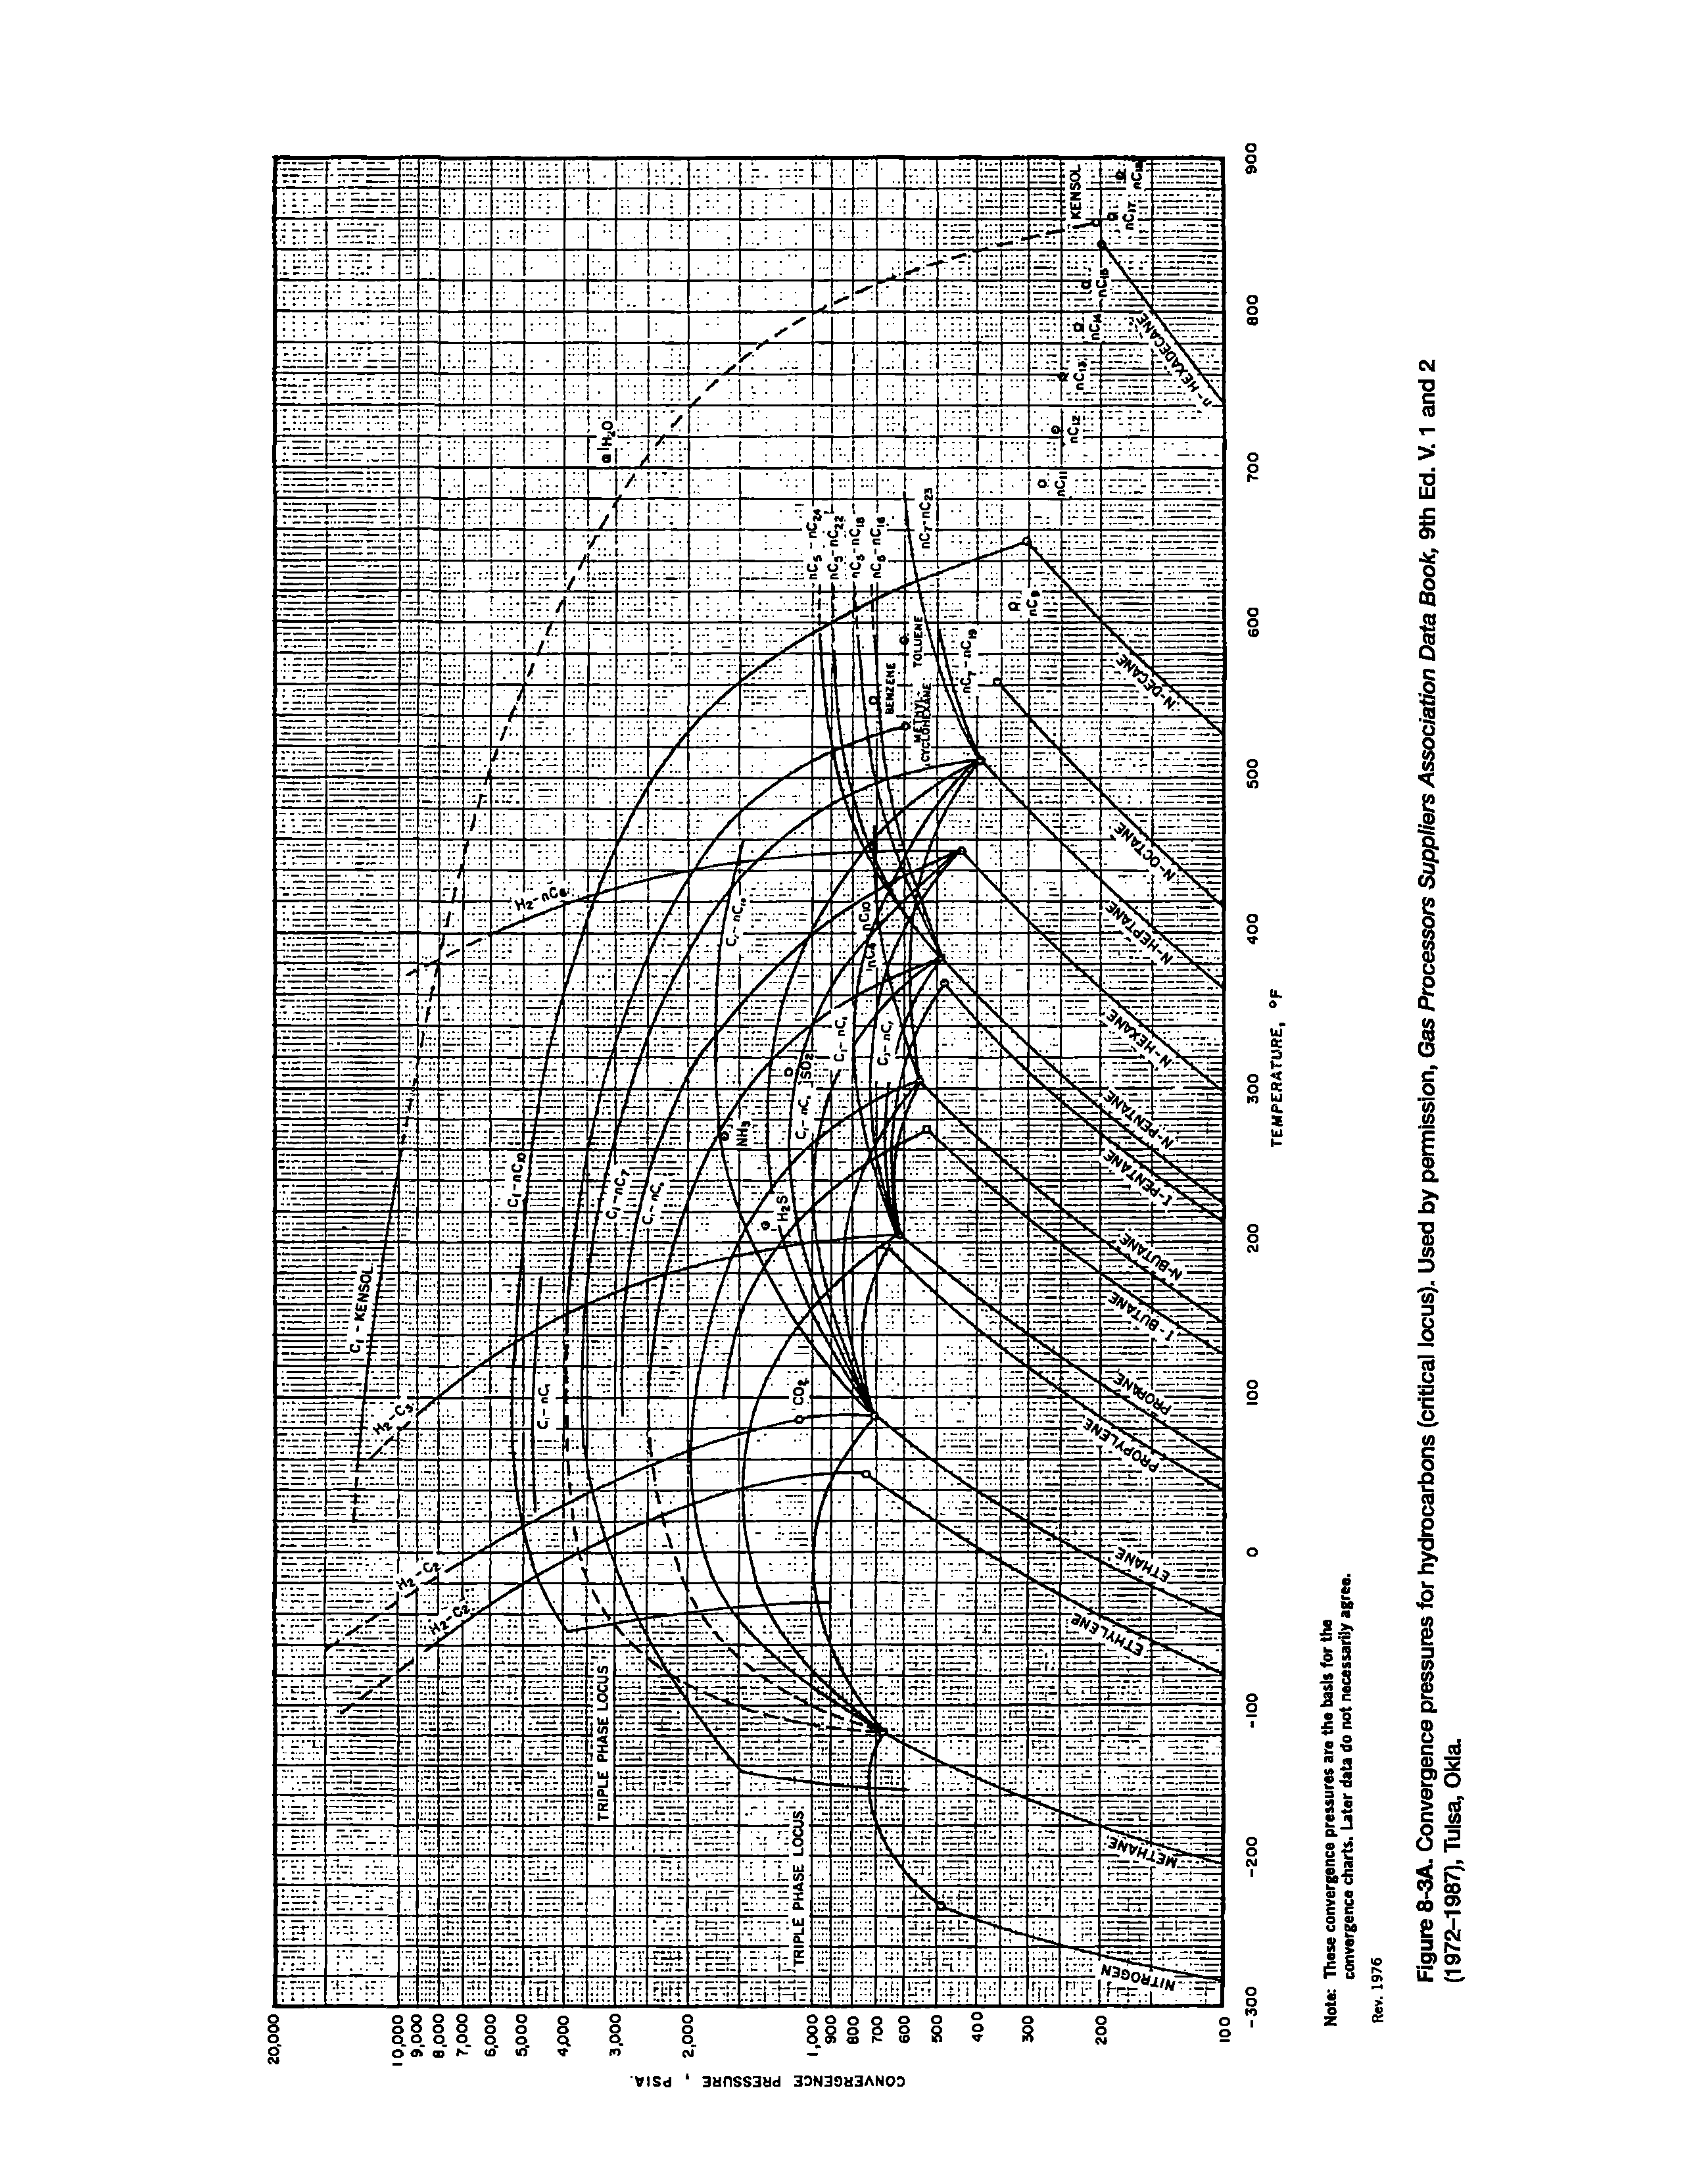 Figure 8-3A. Convergence pressures for hydrocarbons (critical iocus). Used by permission, Gas Processors Suppliers Association Data Book, 9th Ed. V. 1 and 2 (1972-1987), Tulsa, Okla.